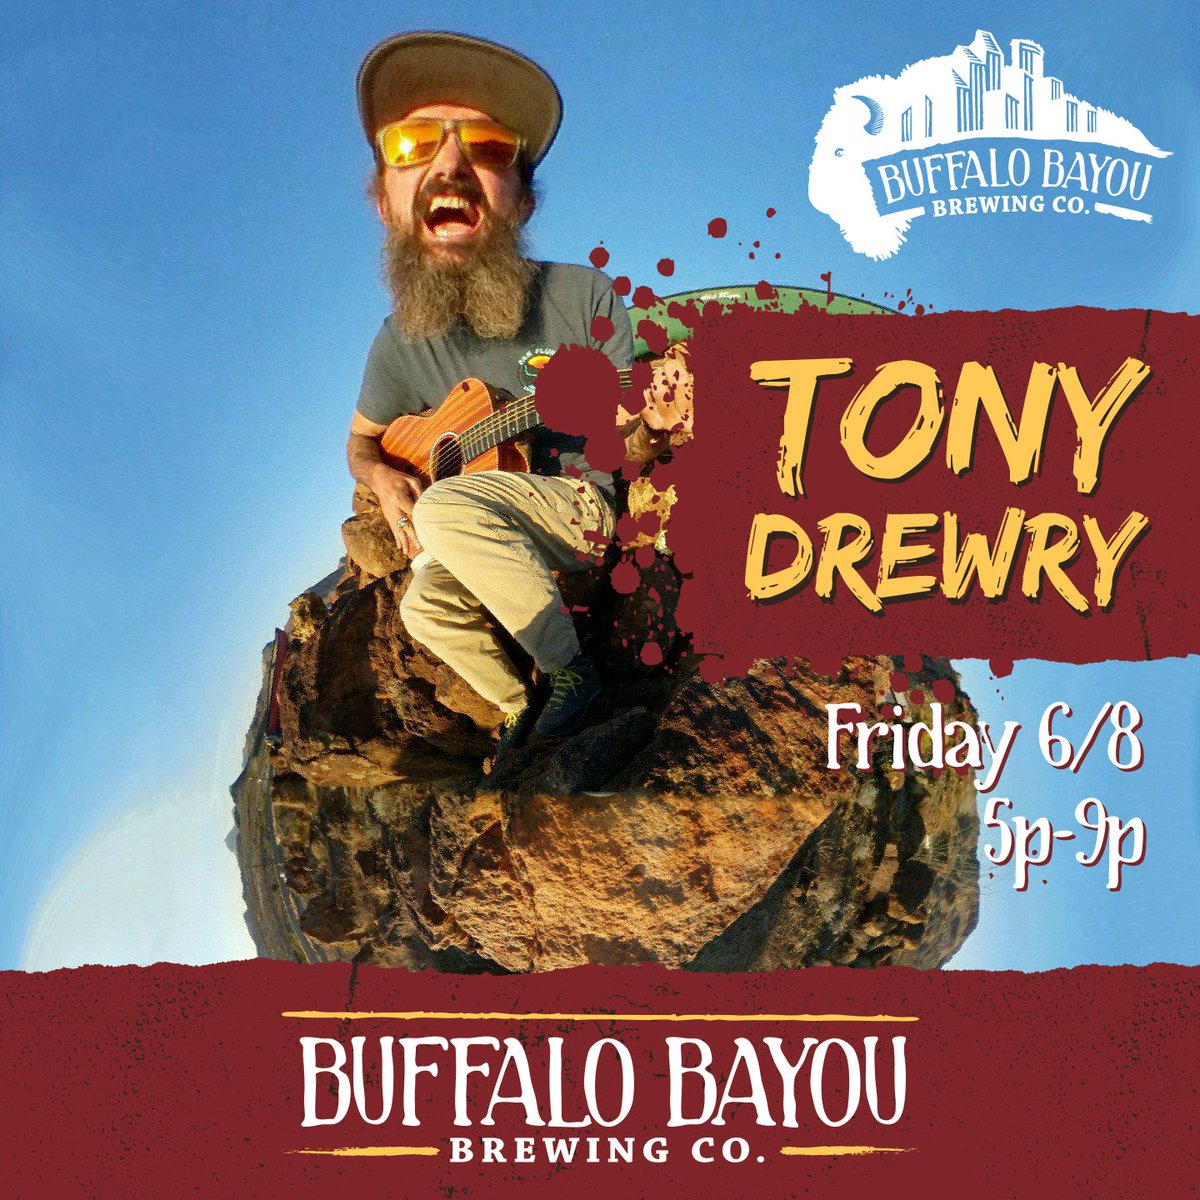 This Friday 6/8 we're having a special Happy Hour guest! Join us at 5p for a traditional sip with the 'beer Pedaler' Tony Drewry, then hang out til 9p while Tony works some magic on his guitar. This is gonna be a hell of a time! #shitdang